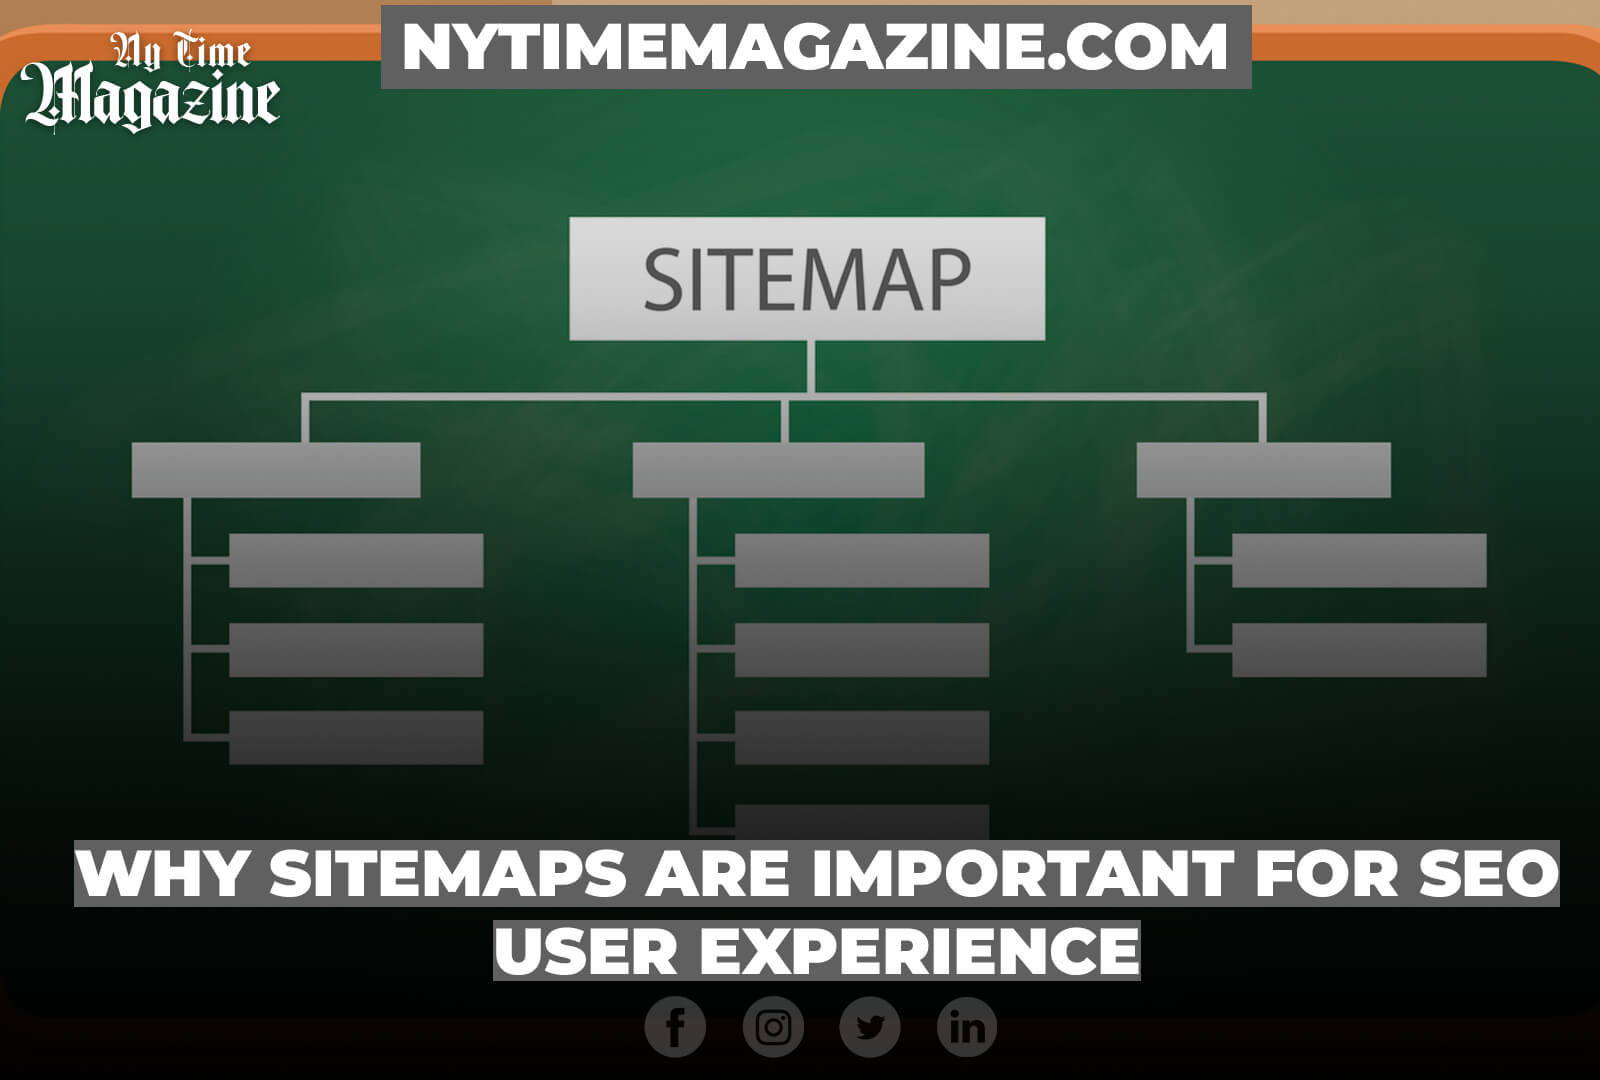 Why Sitemaps Are Important for SEO and User Experience